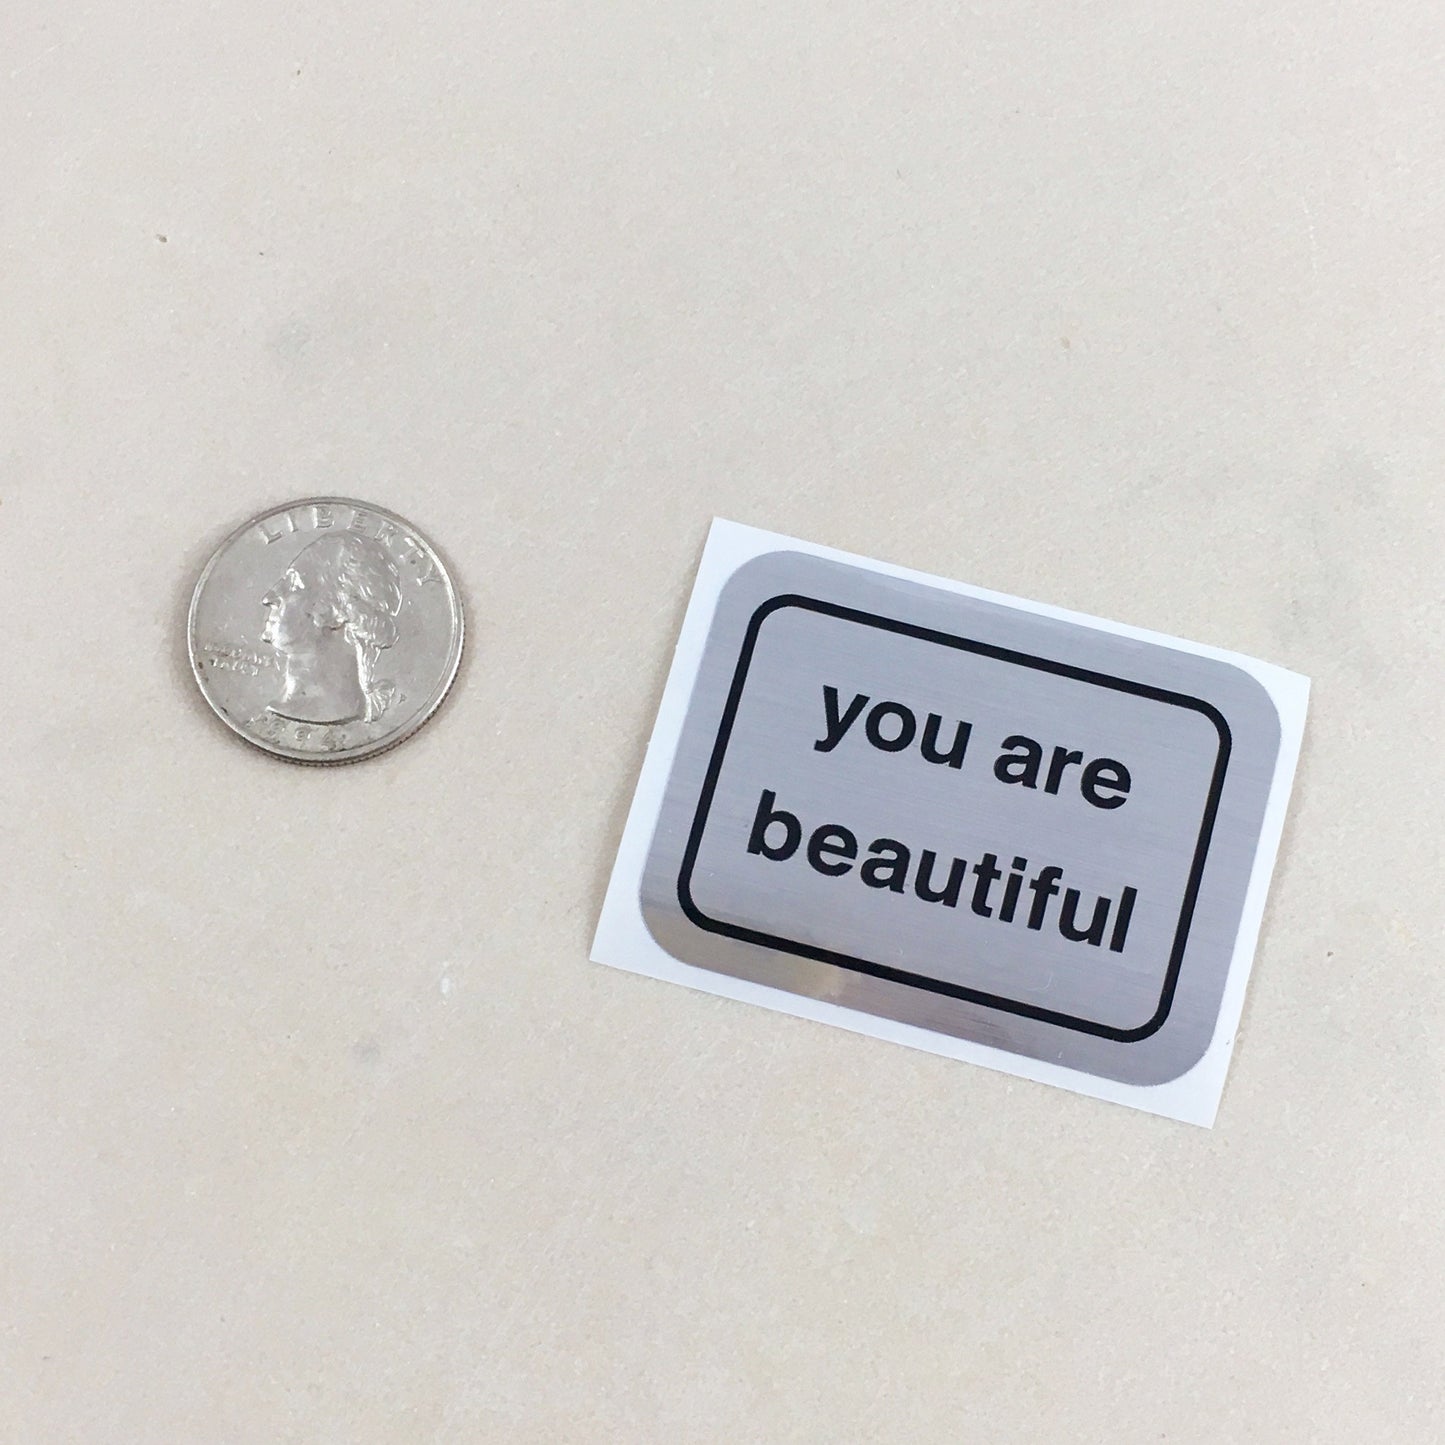 Add a You Are Beautiful Sticker to Your Gift!